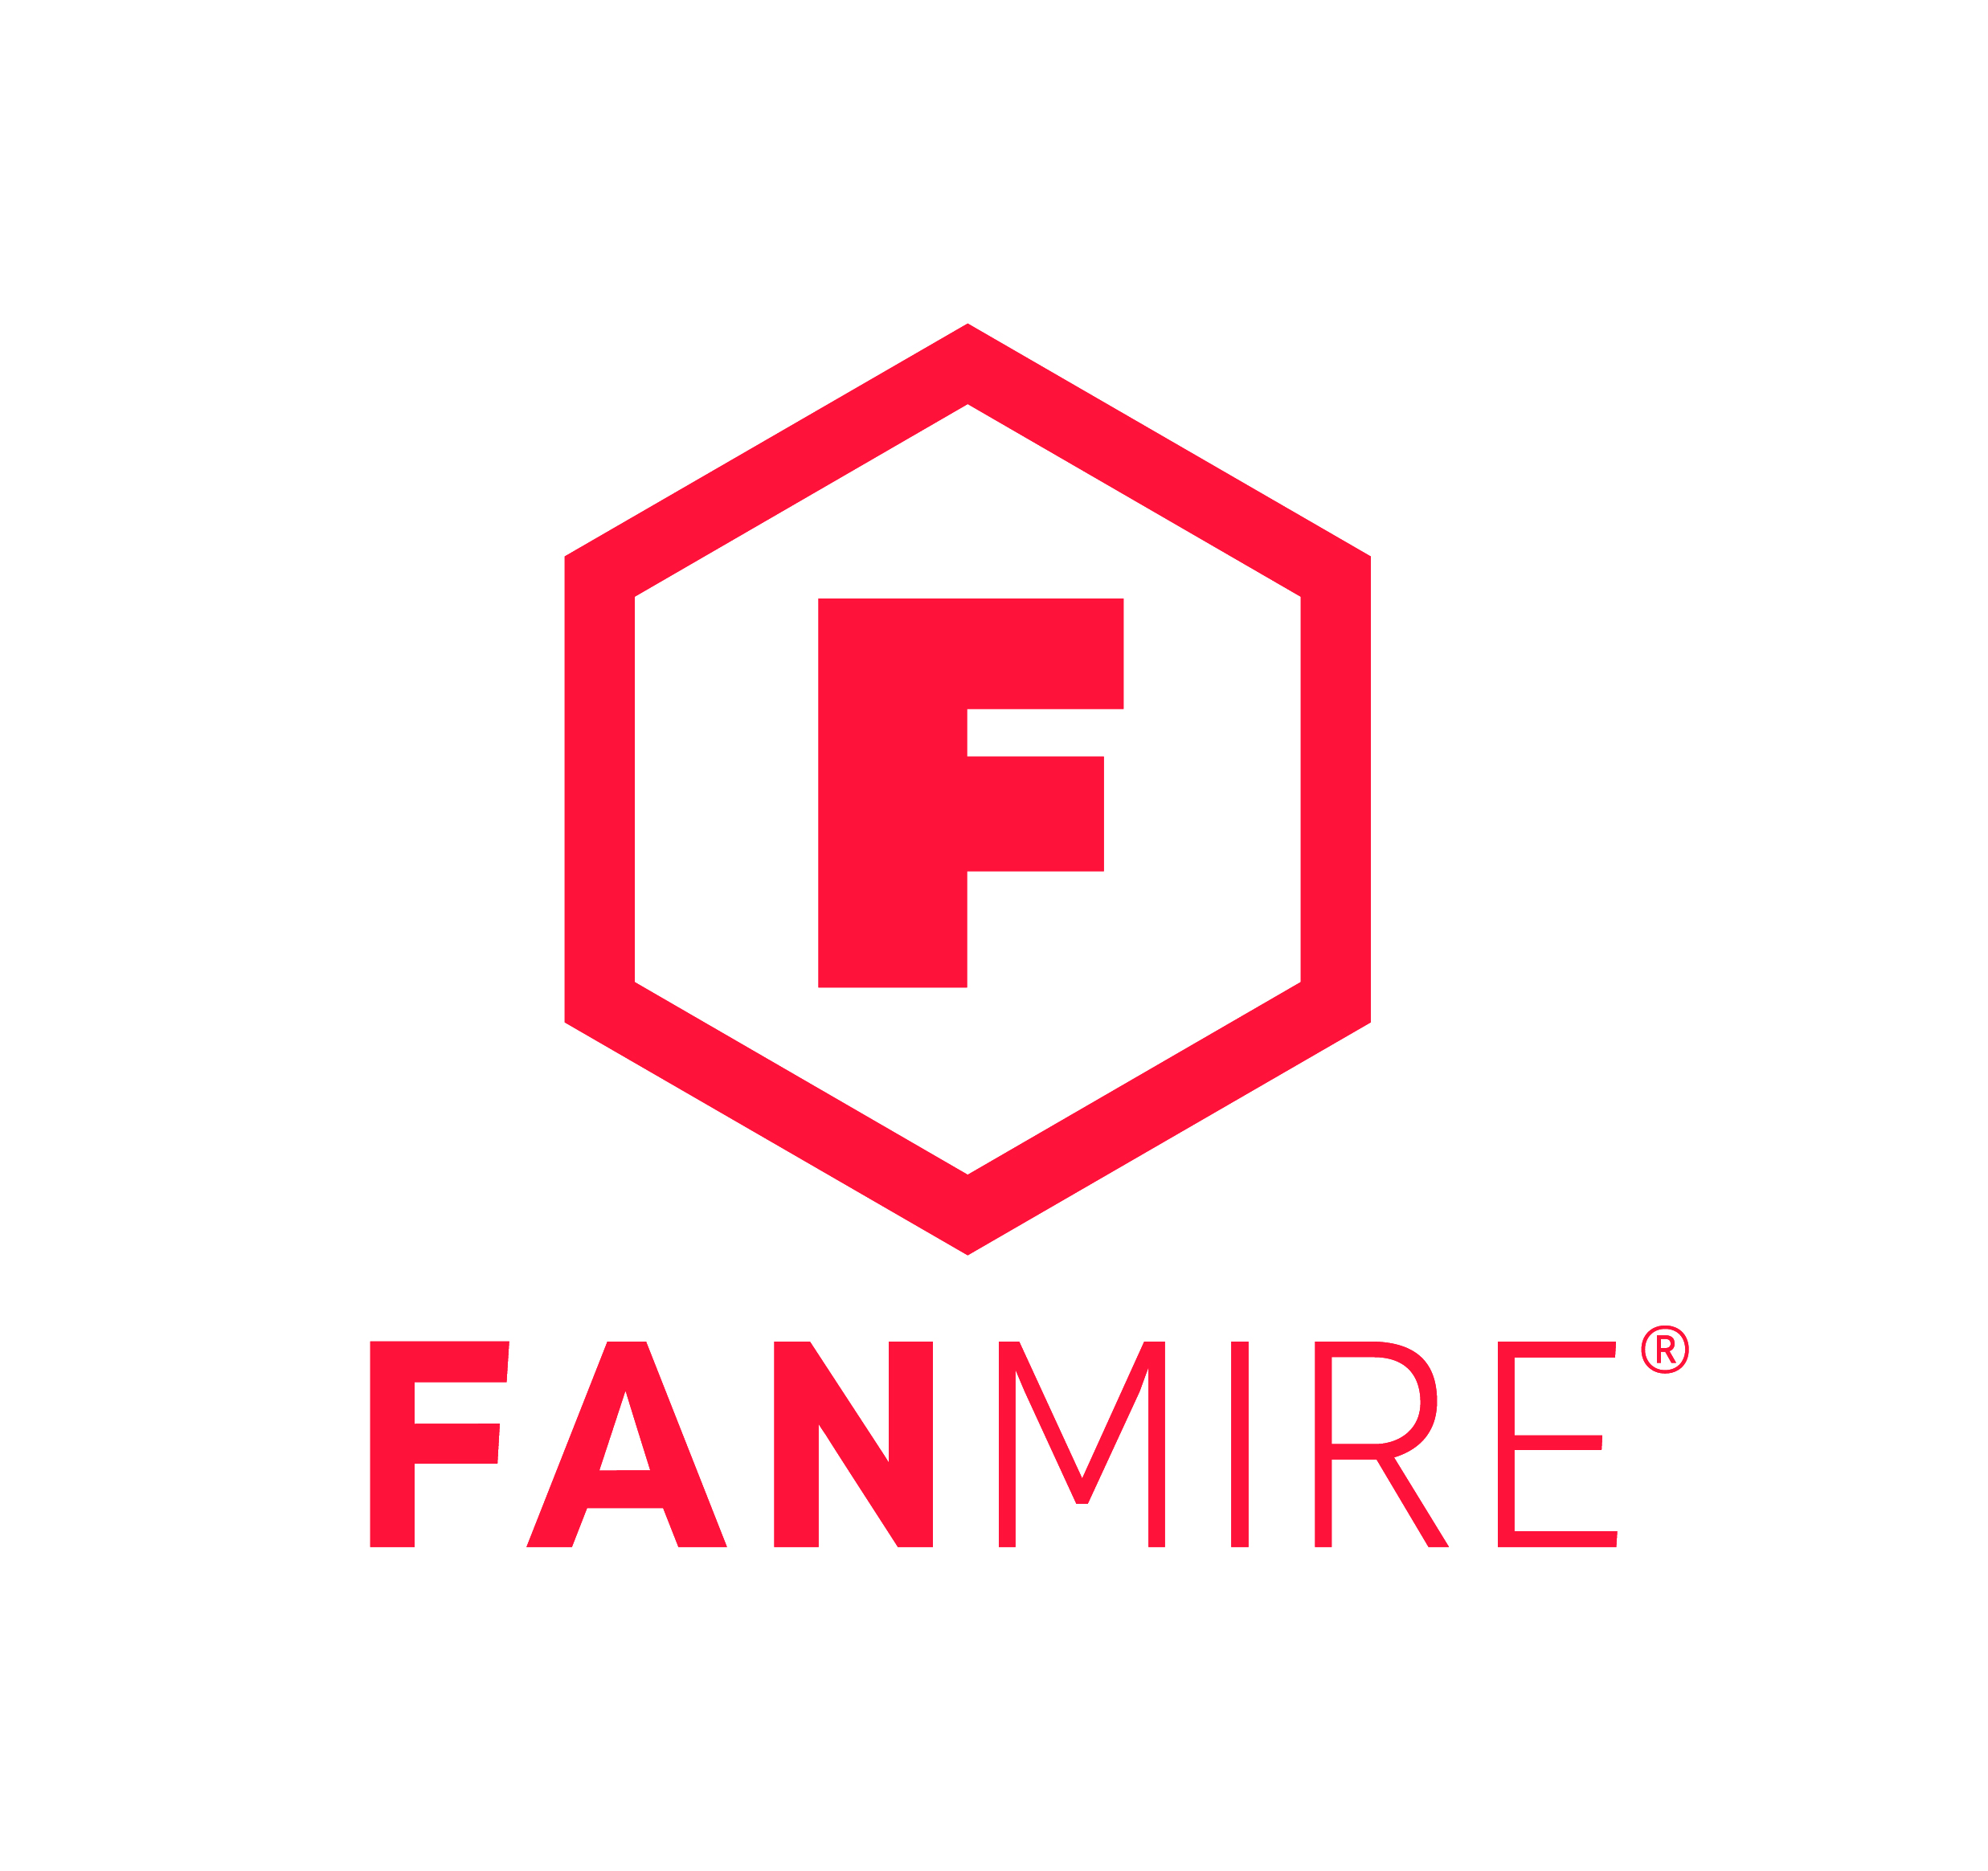 Fanmire - An Exciting New Way For Fans To Connect To The Stars, Brands, and Influencers They Admire